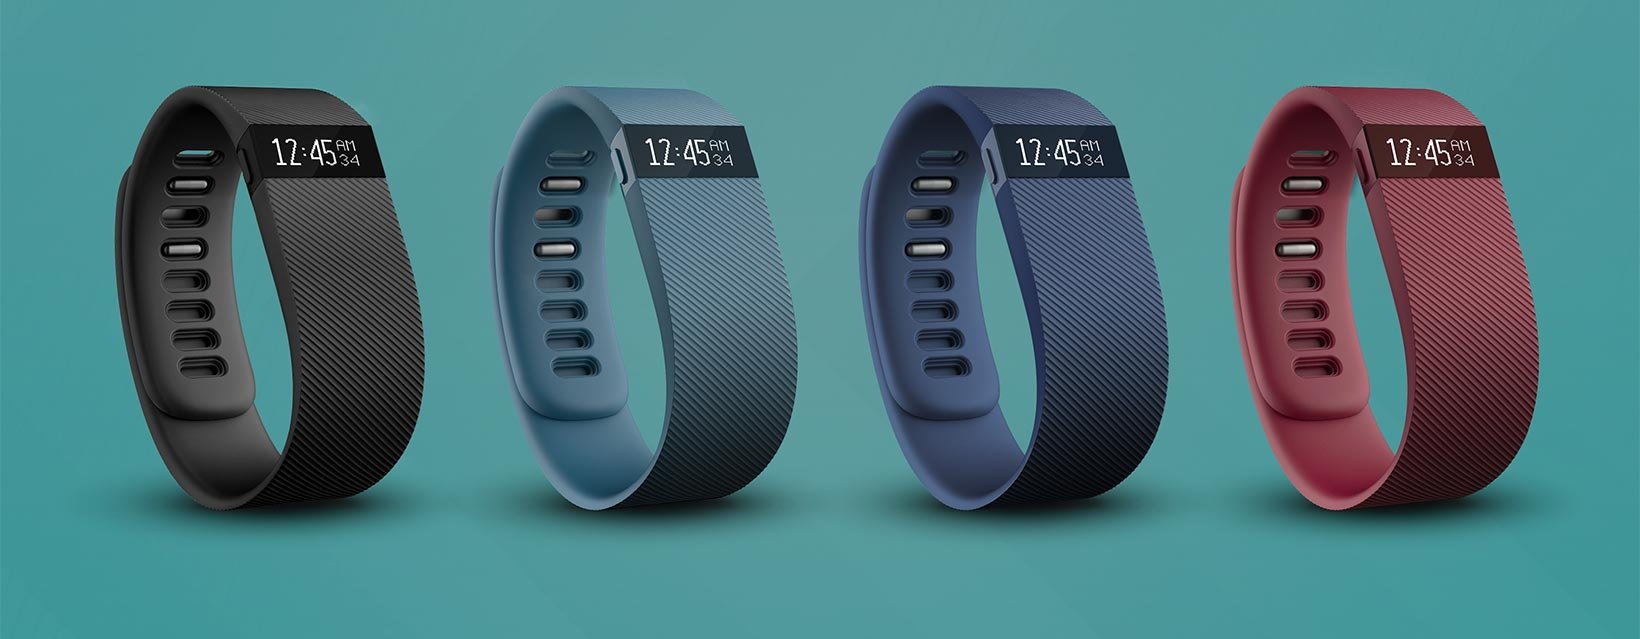 FitBit Charge HR - fitness tracker